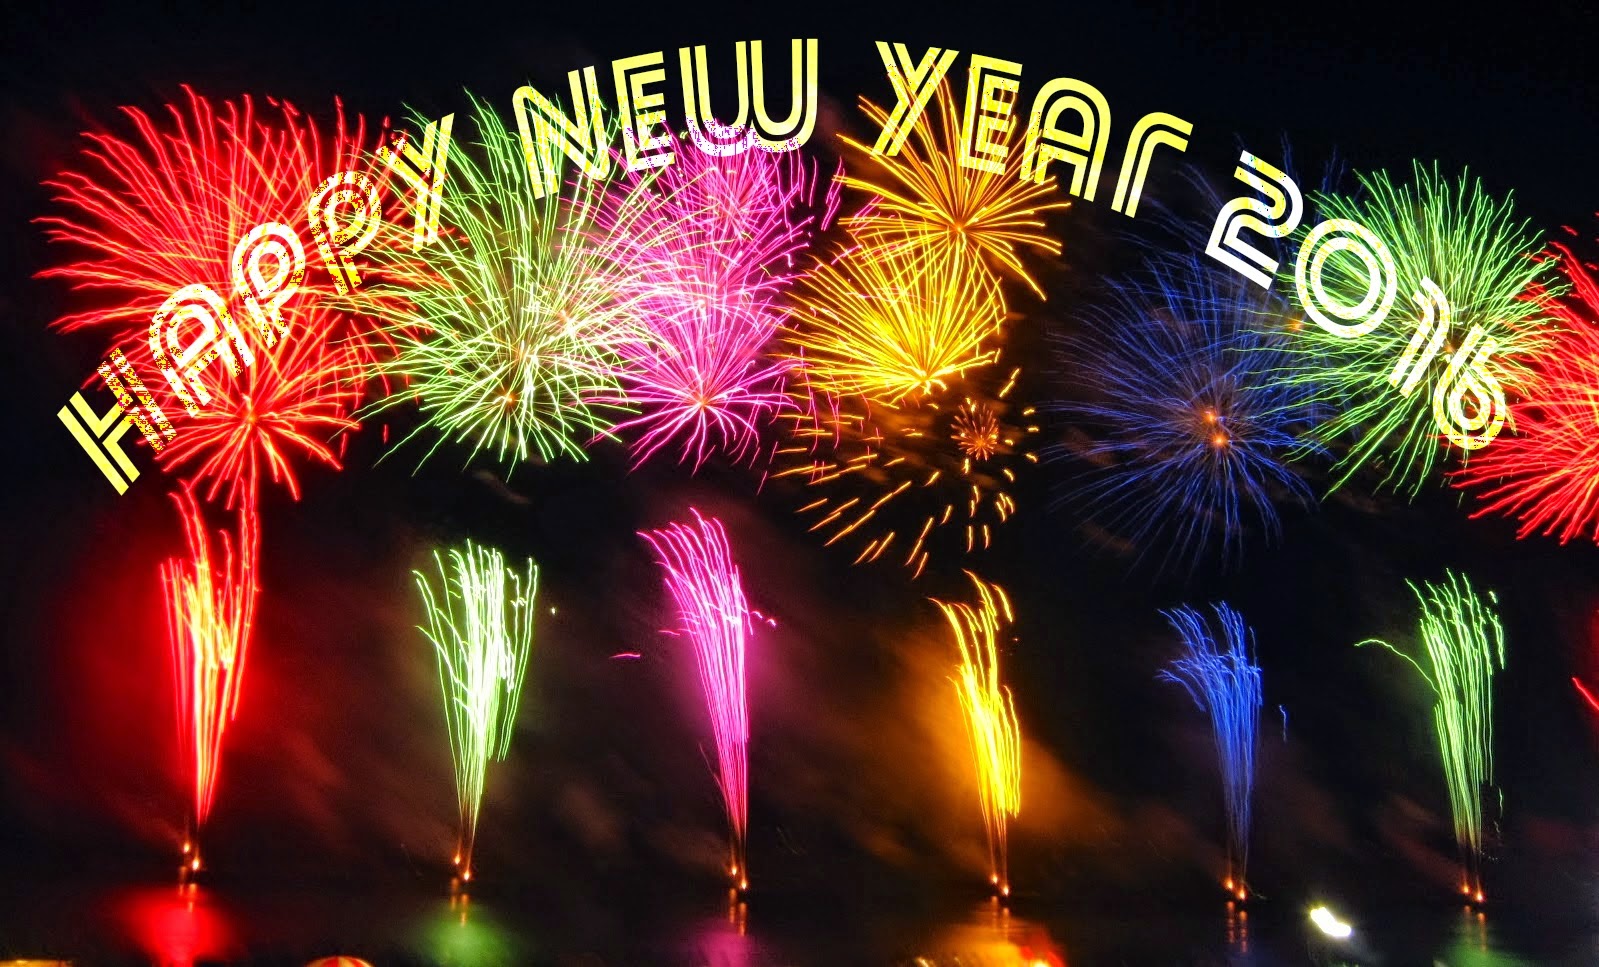 Happy New Year 2016 hd Images, Wallpapers - Free Download 